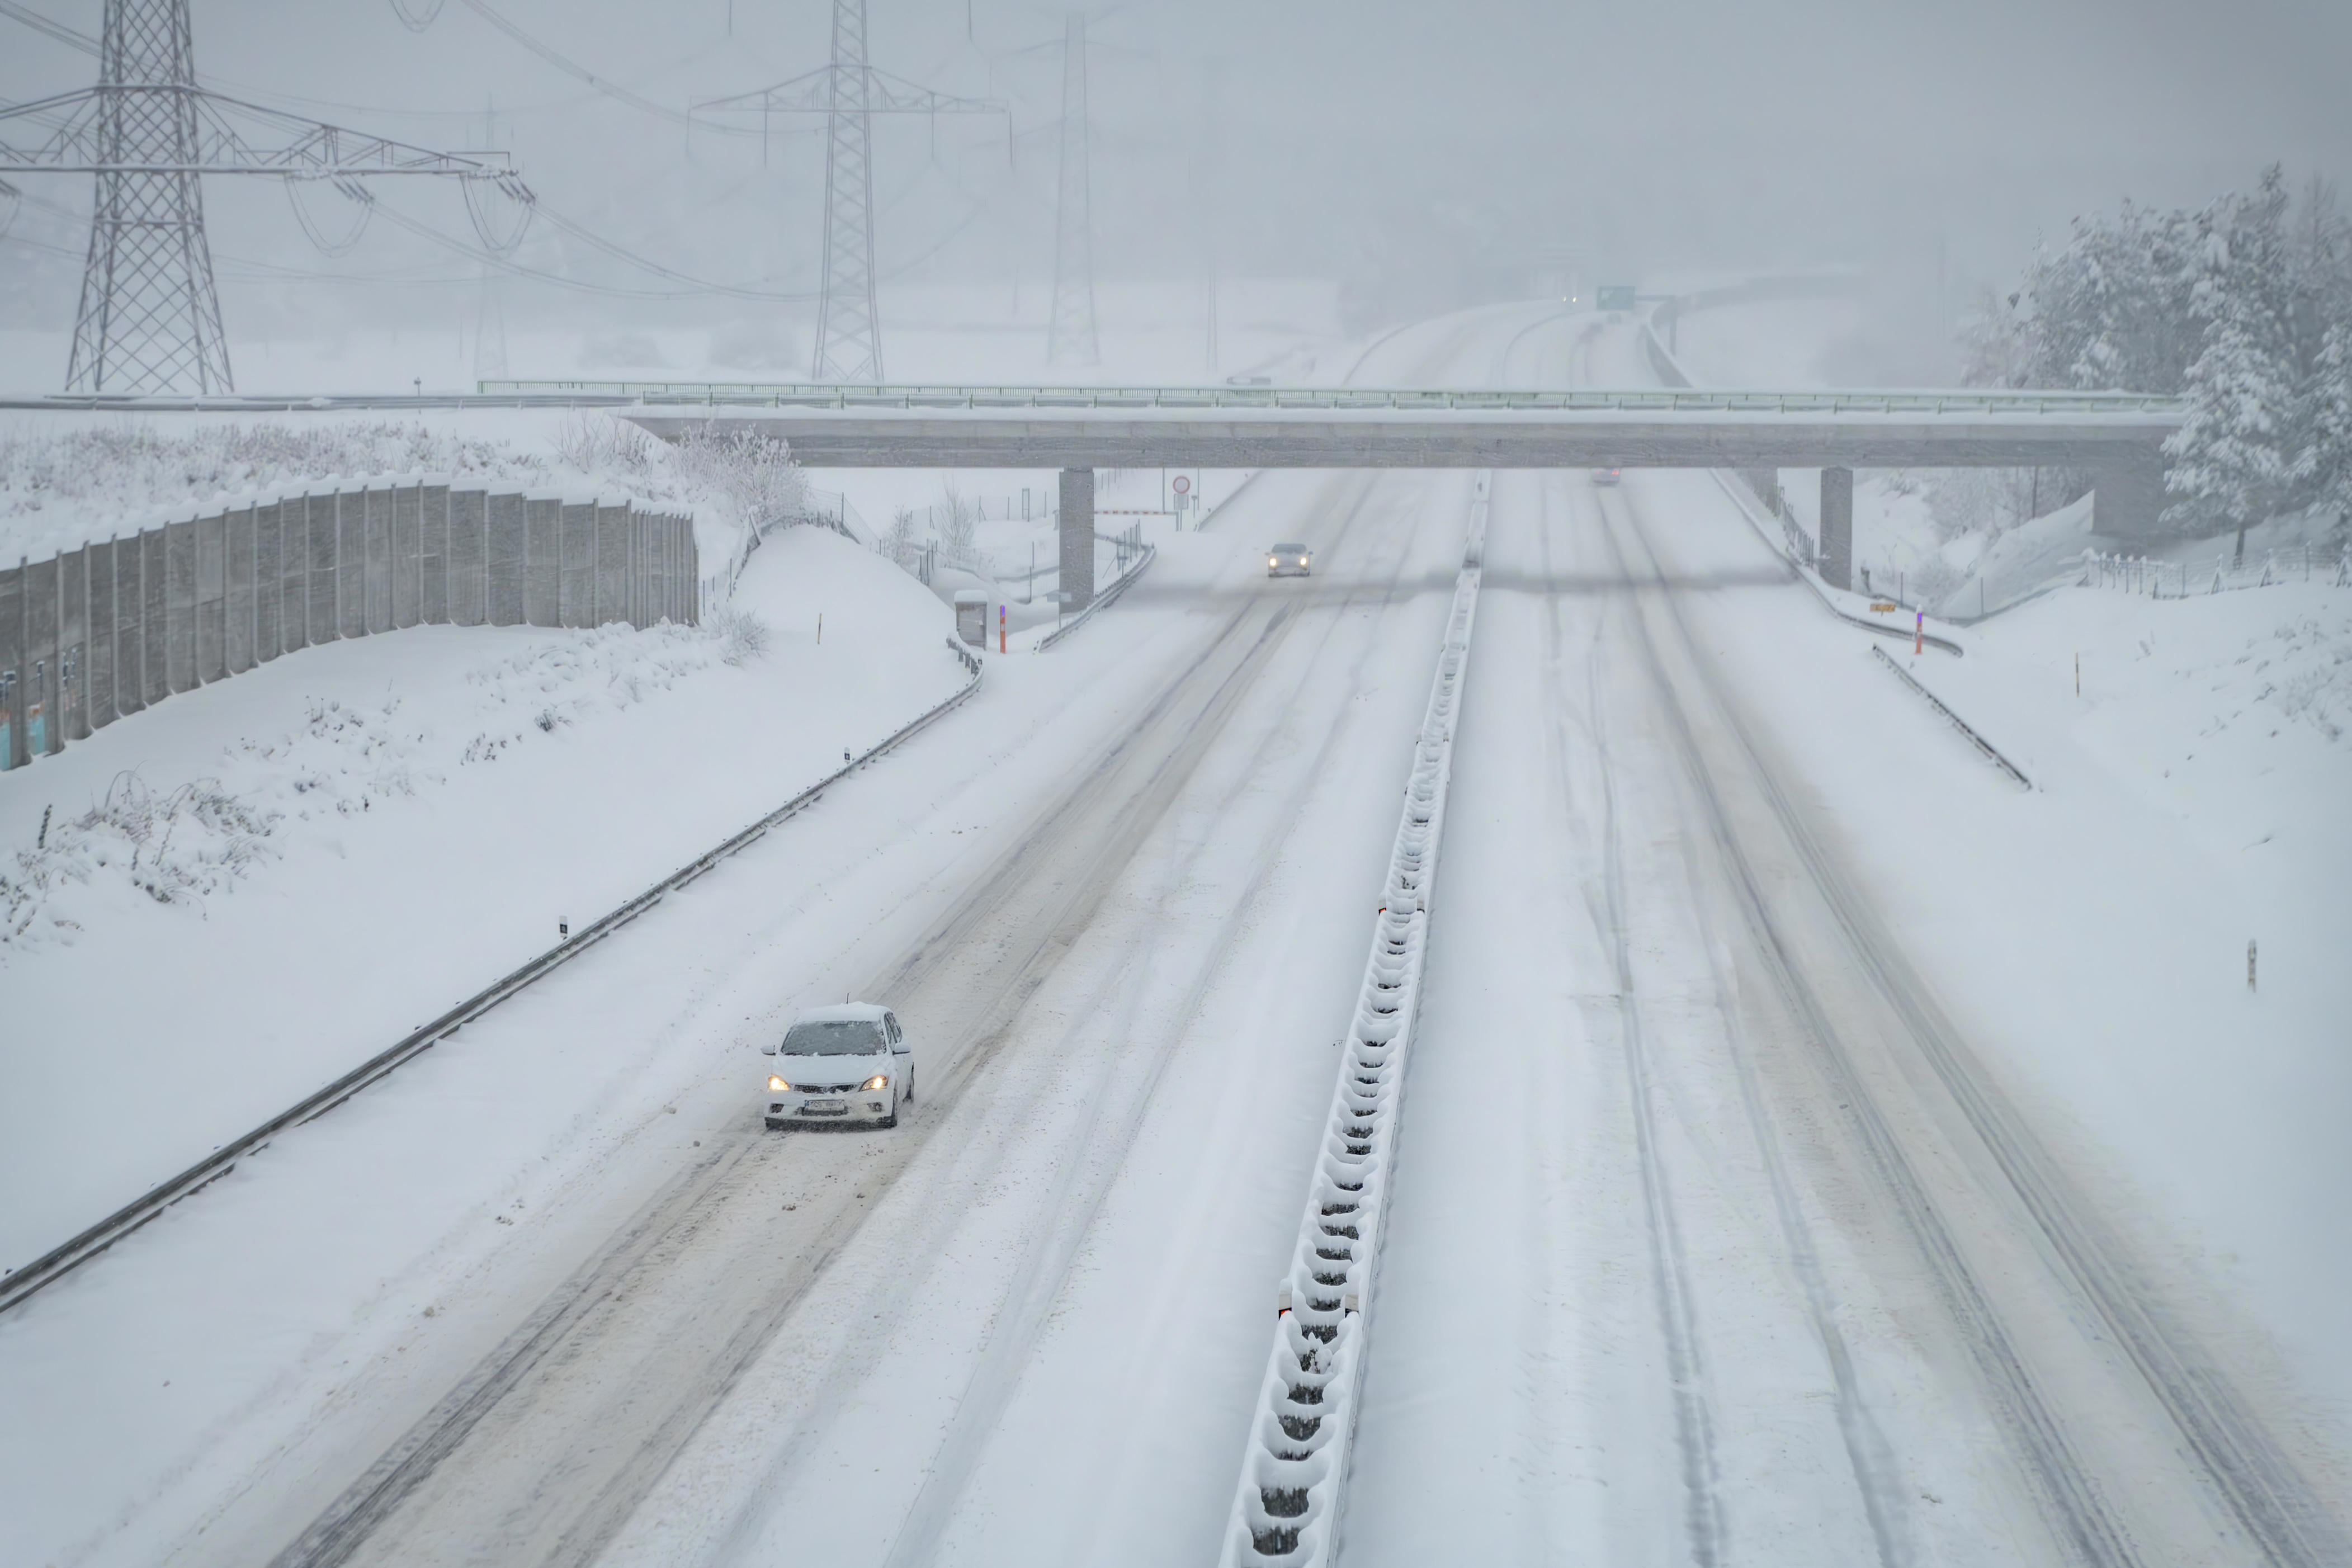 Blizzard Conditions Across Great Plains Creates Post-Christmas Travel Chaos